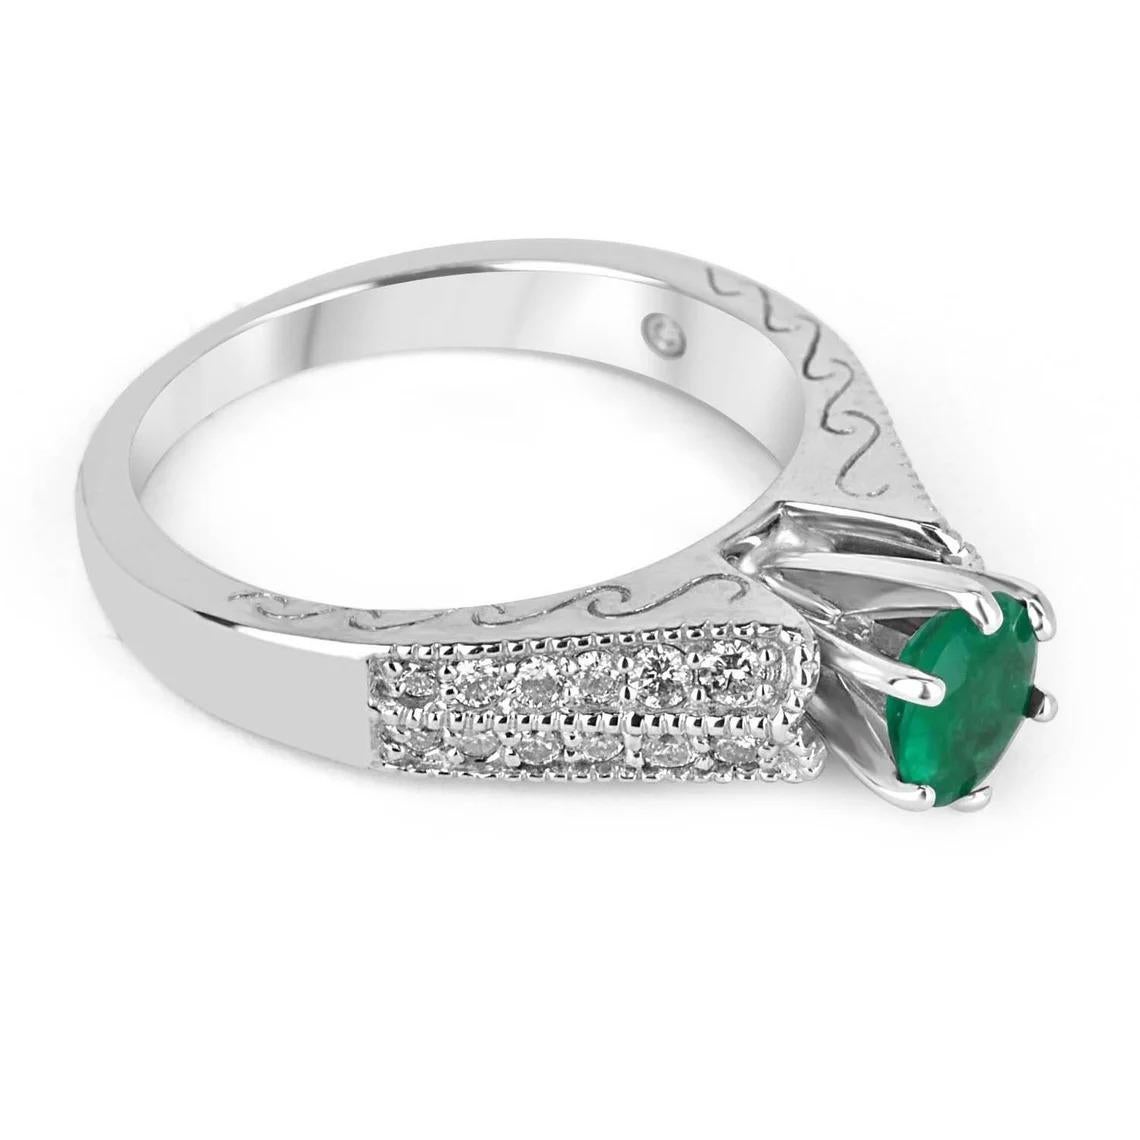 A Colombian emerald & diamond accent 14K white gold engagement ring. This ring takes 'solitaire with accents' to another level. The earth mined, Colombian Emerald is prong-set in a six-prong setting, not only is this the most secure way to set a